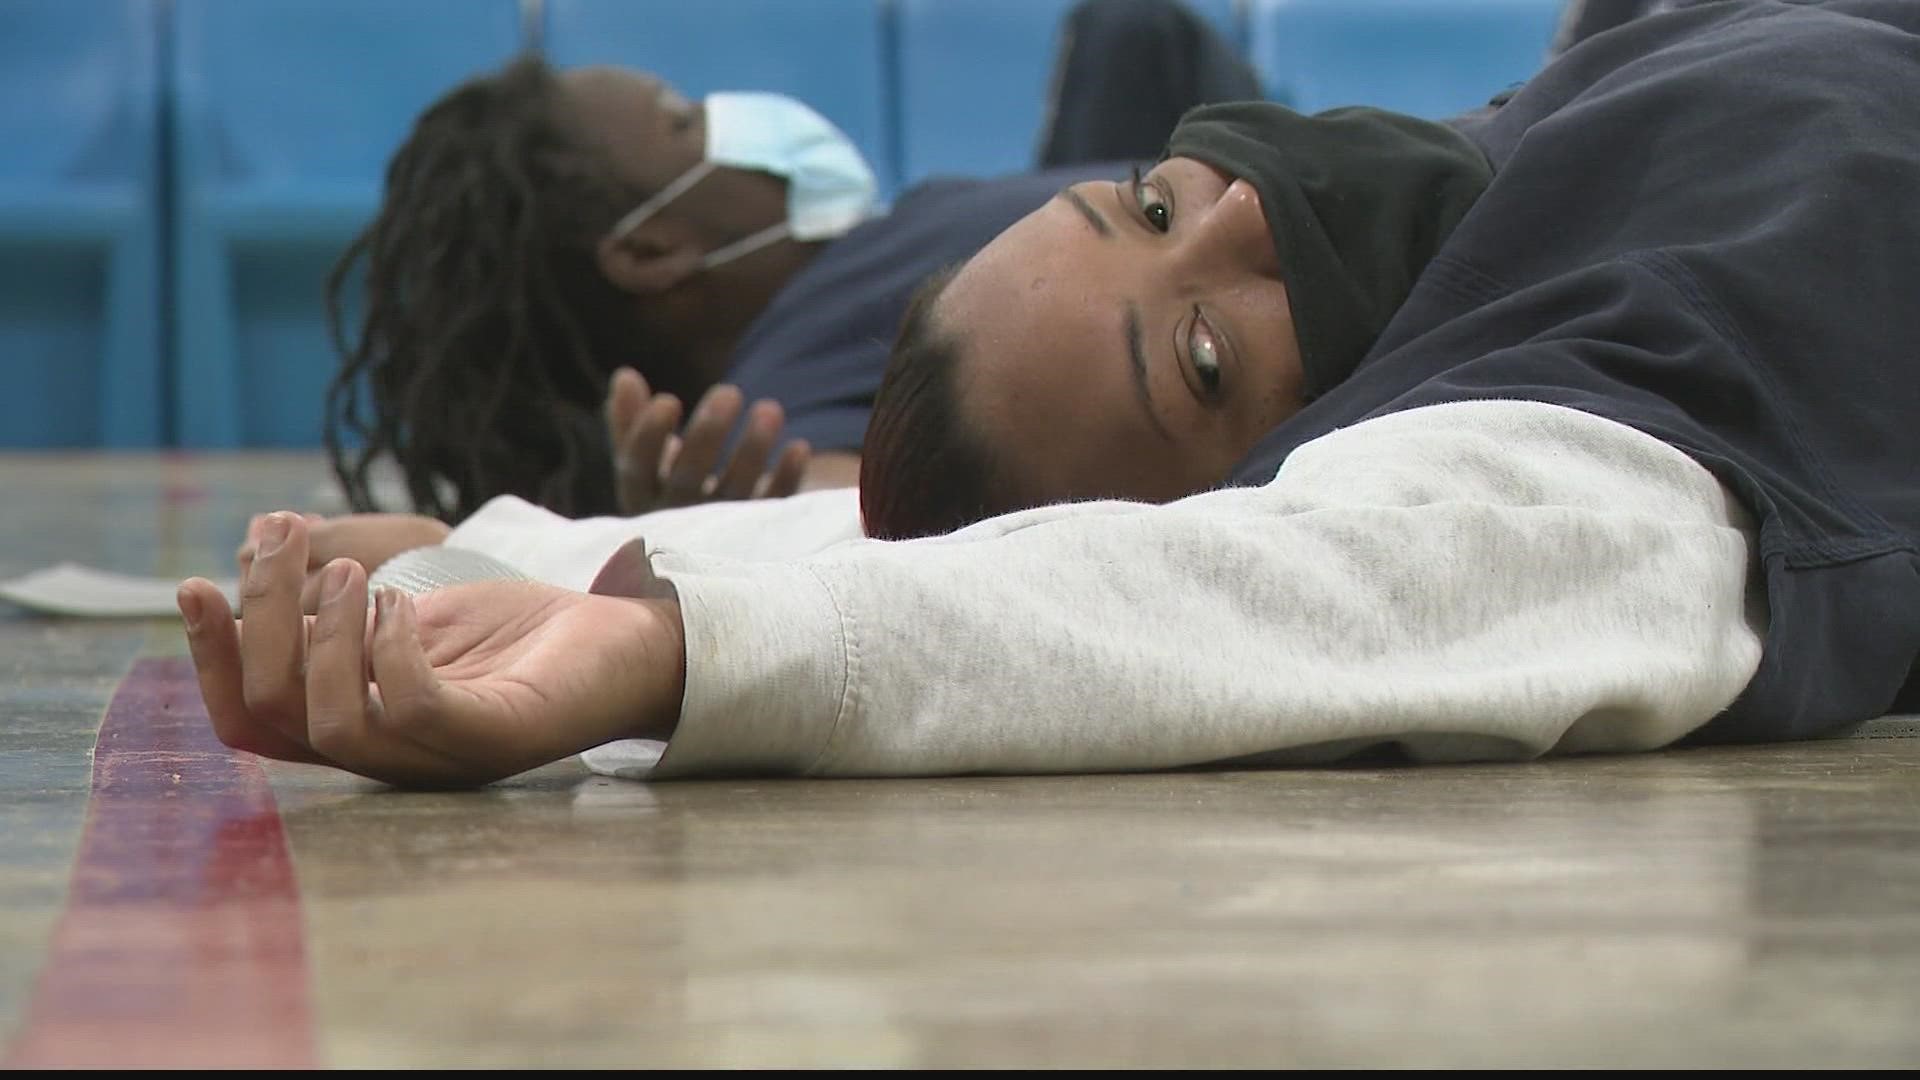 Inmates and detention officers said yoga classes in Fulton County Jail South Annex have made a big difference.